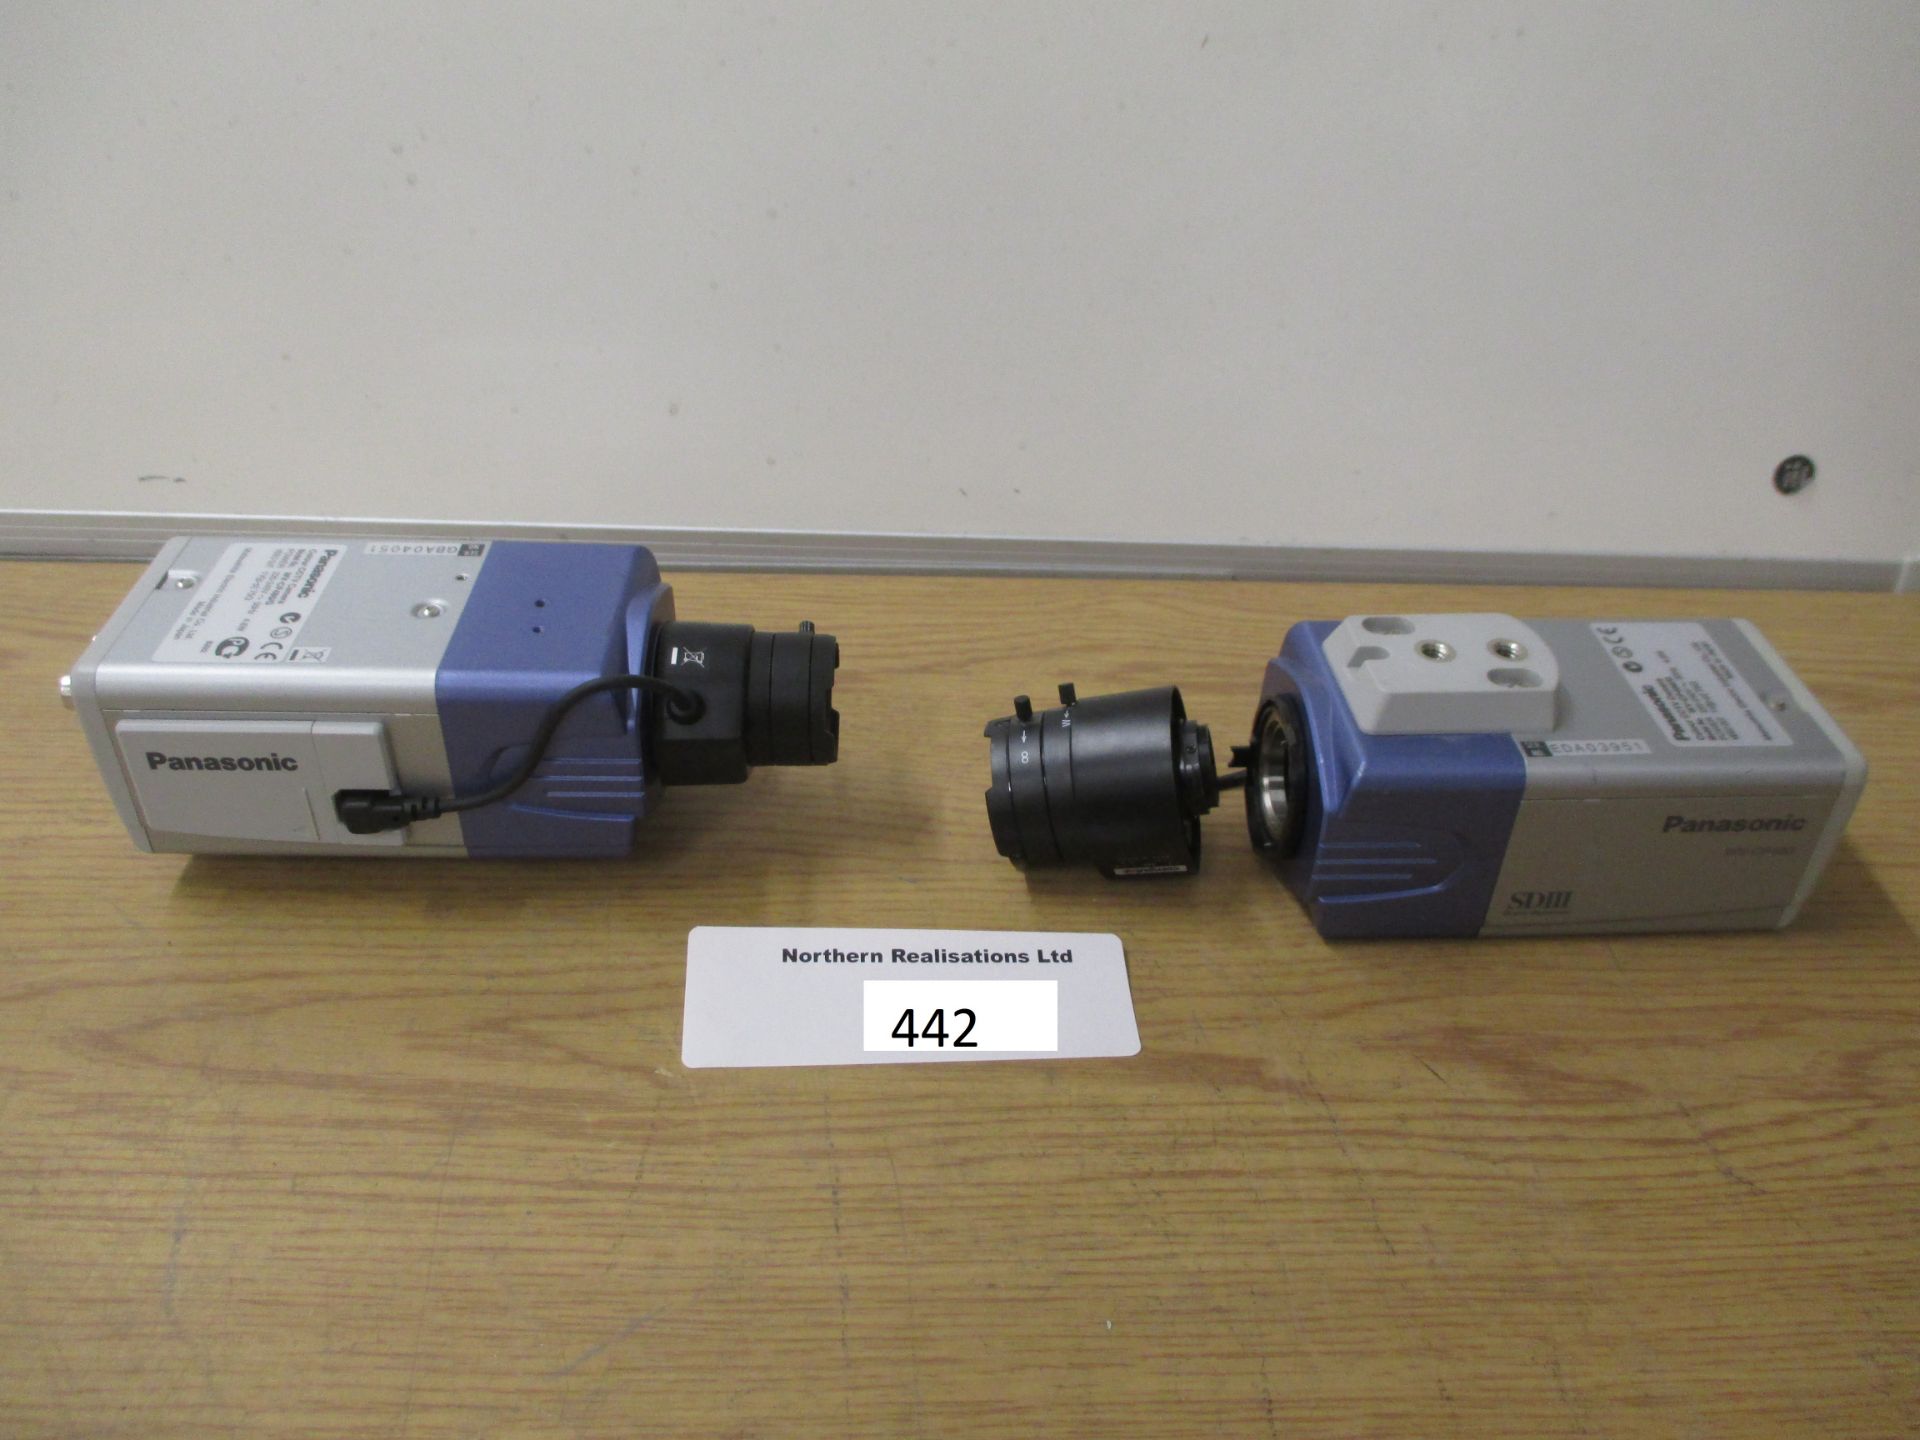 CCTV EQUIPMENT. 2 X PANASONIC SUPER DYNAMIC COLOUR CCTV CAMERAS MODEL WV-CP480/G COMPLETE WITH